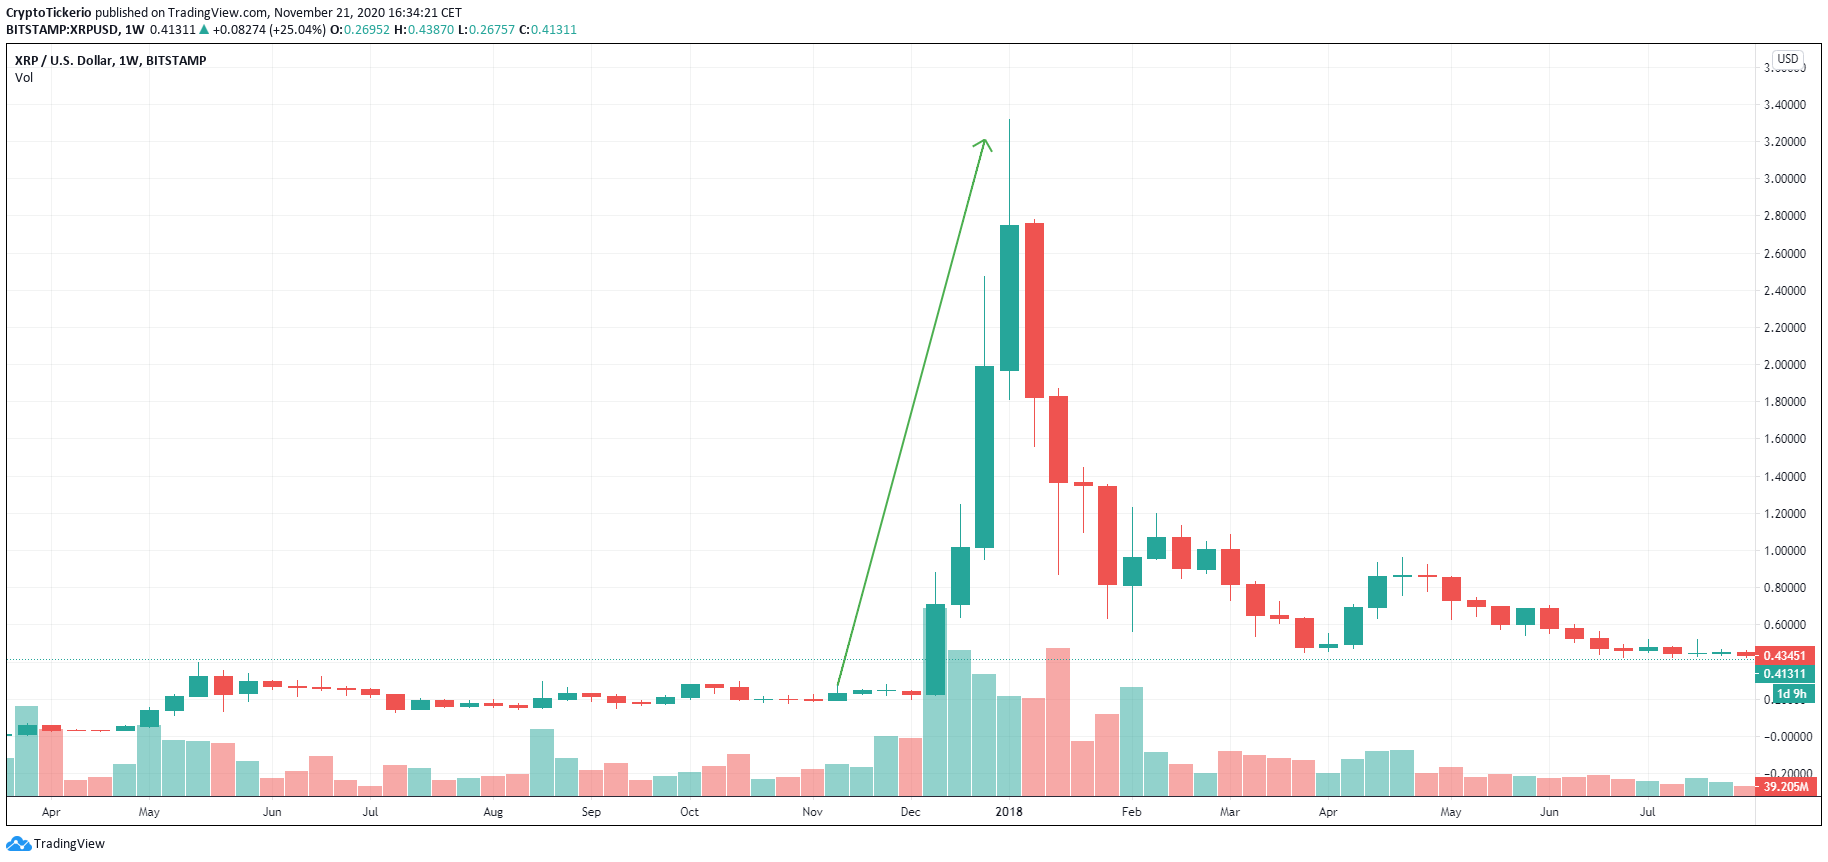 XRP/USD 1-Week Price chart, showing the price increase back in 2017